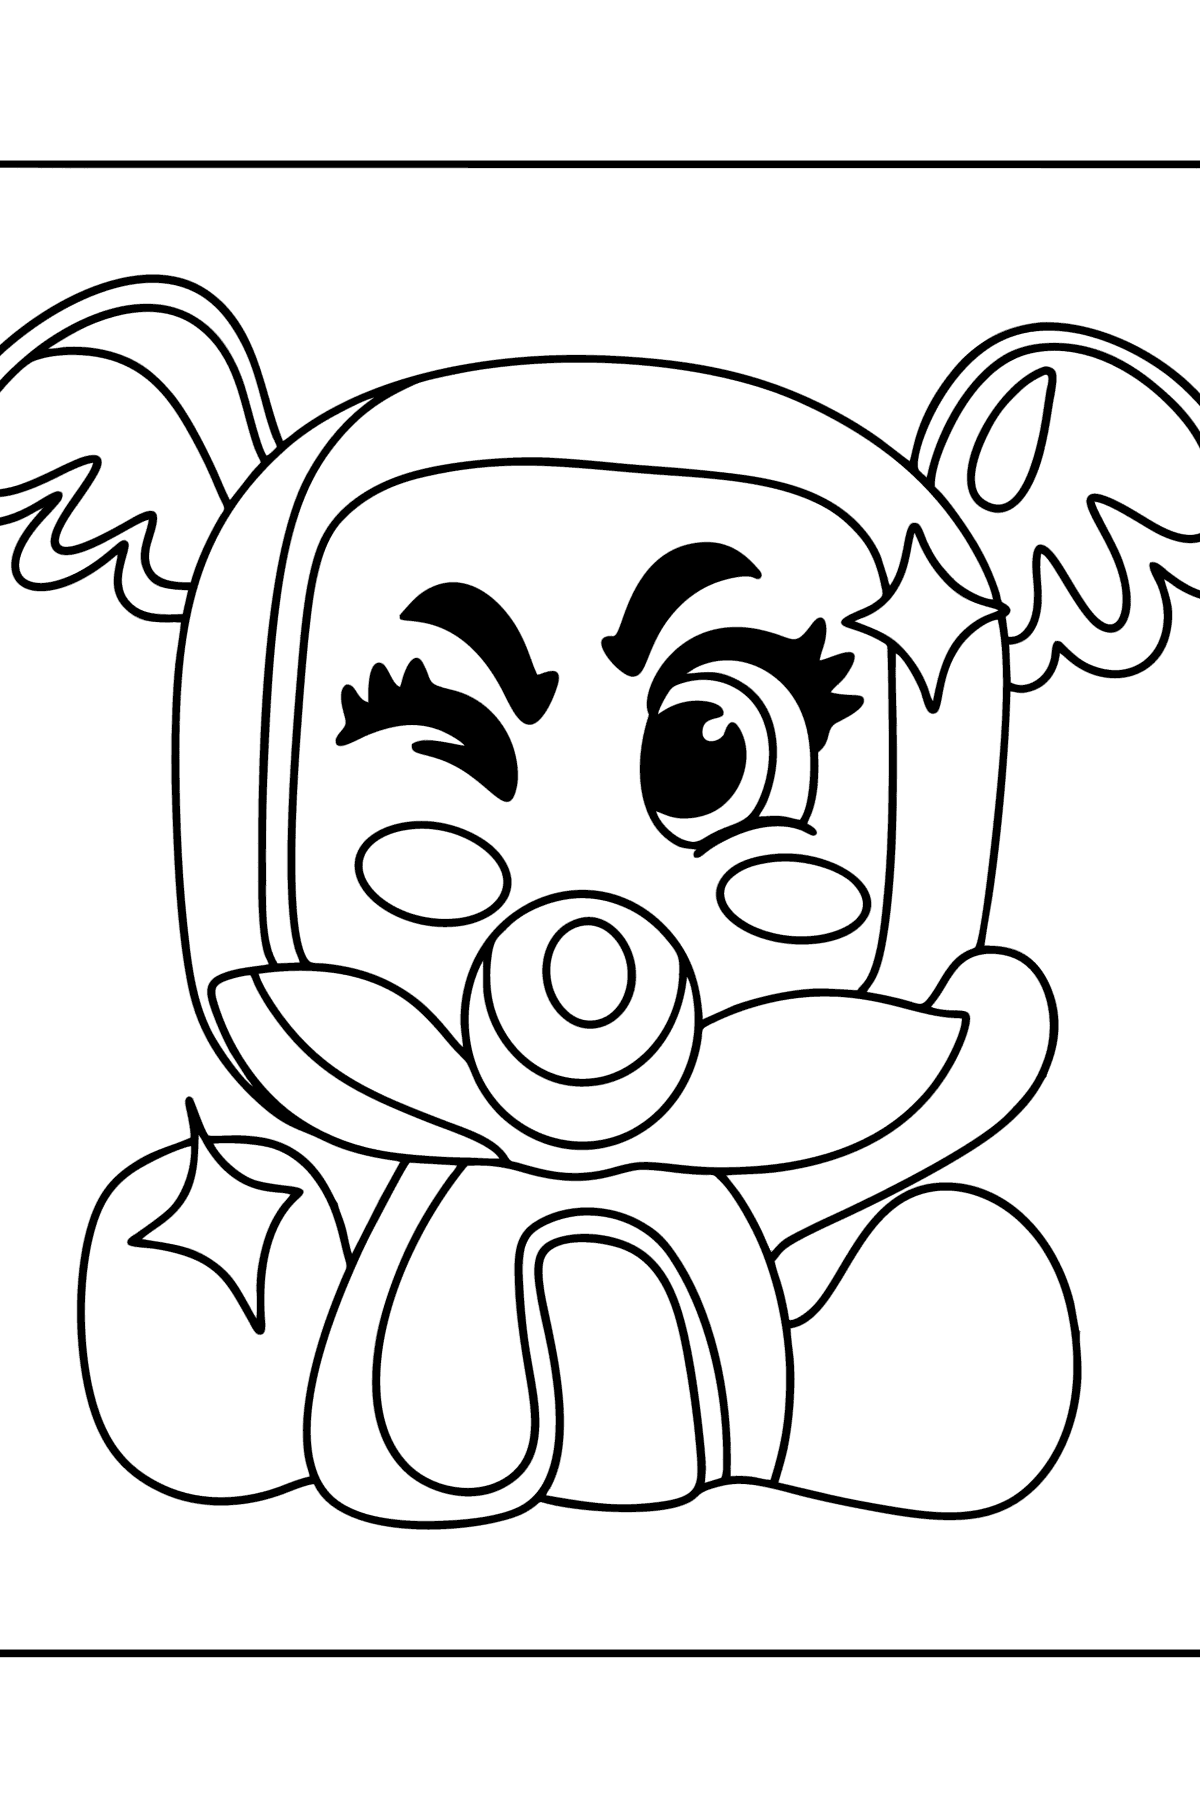 Coloring page MojiPops Kola - Coloring Pages for Kids